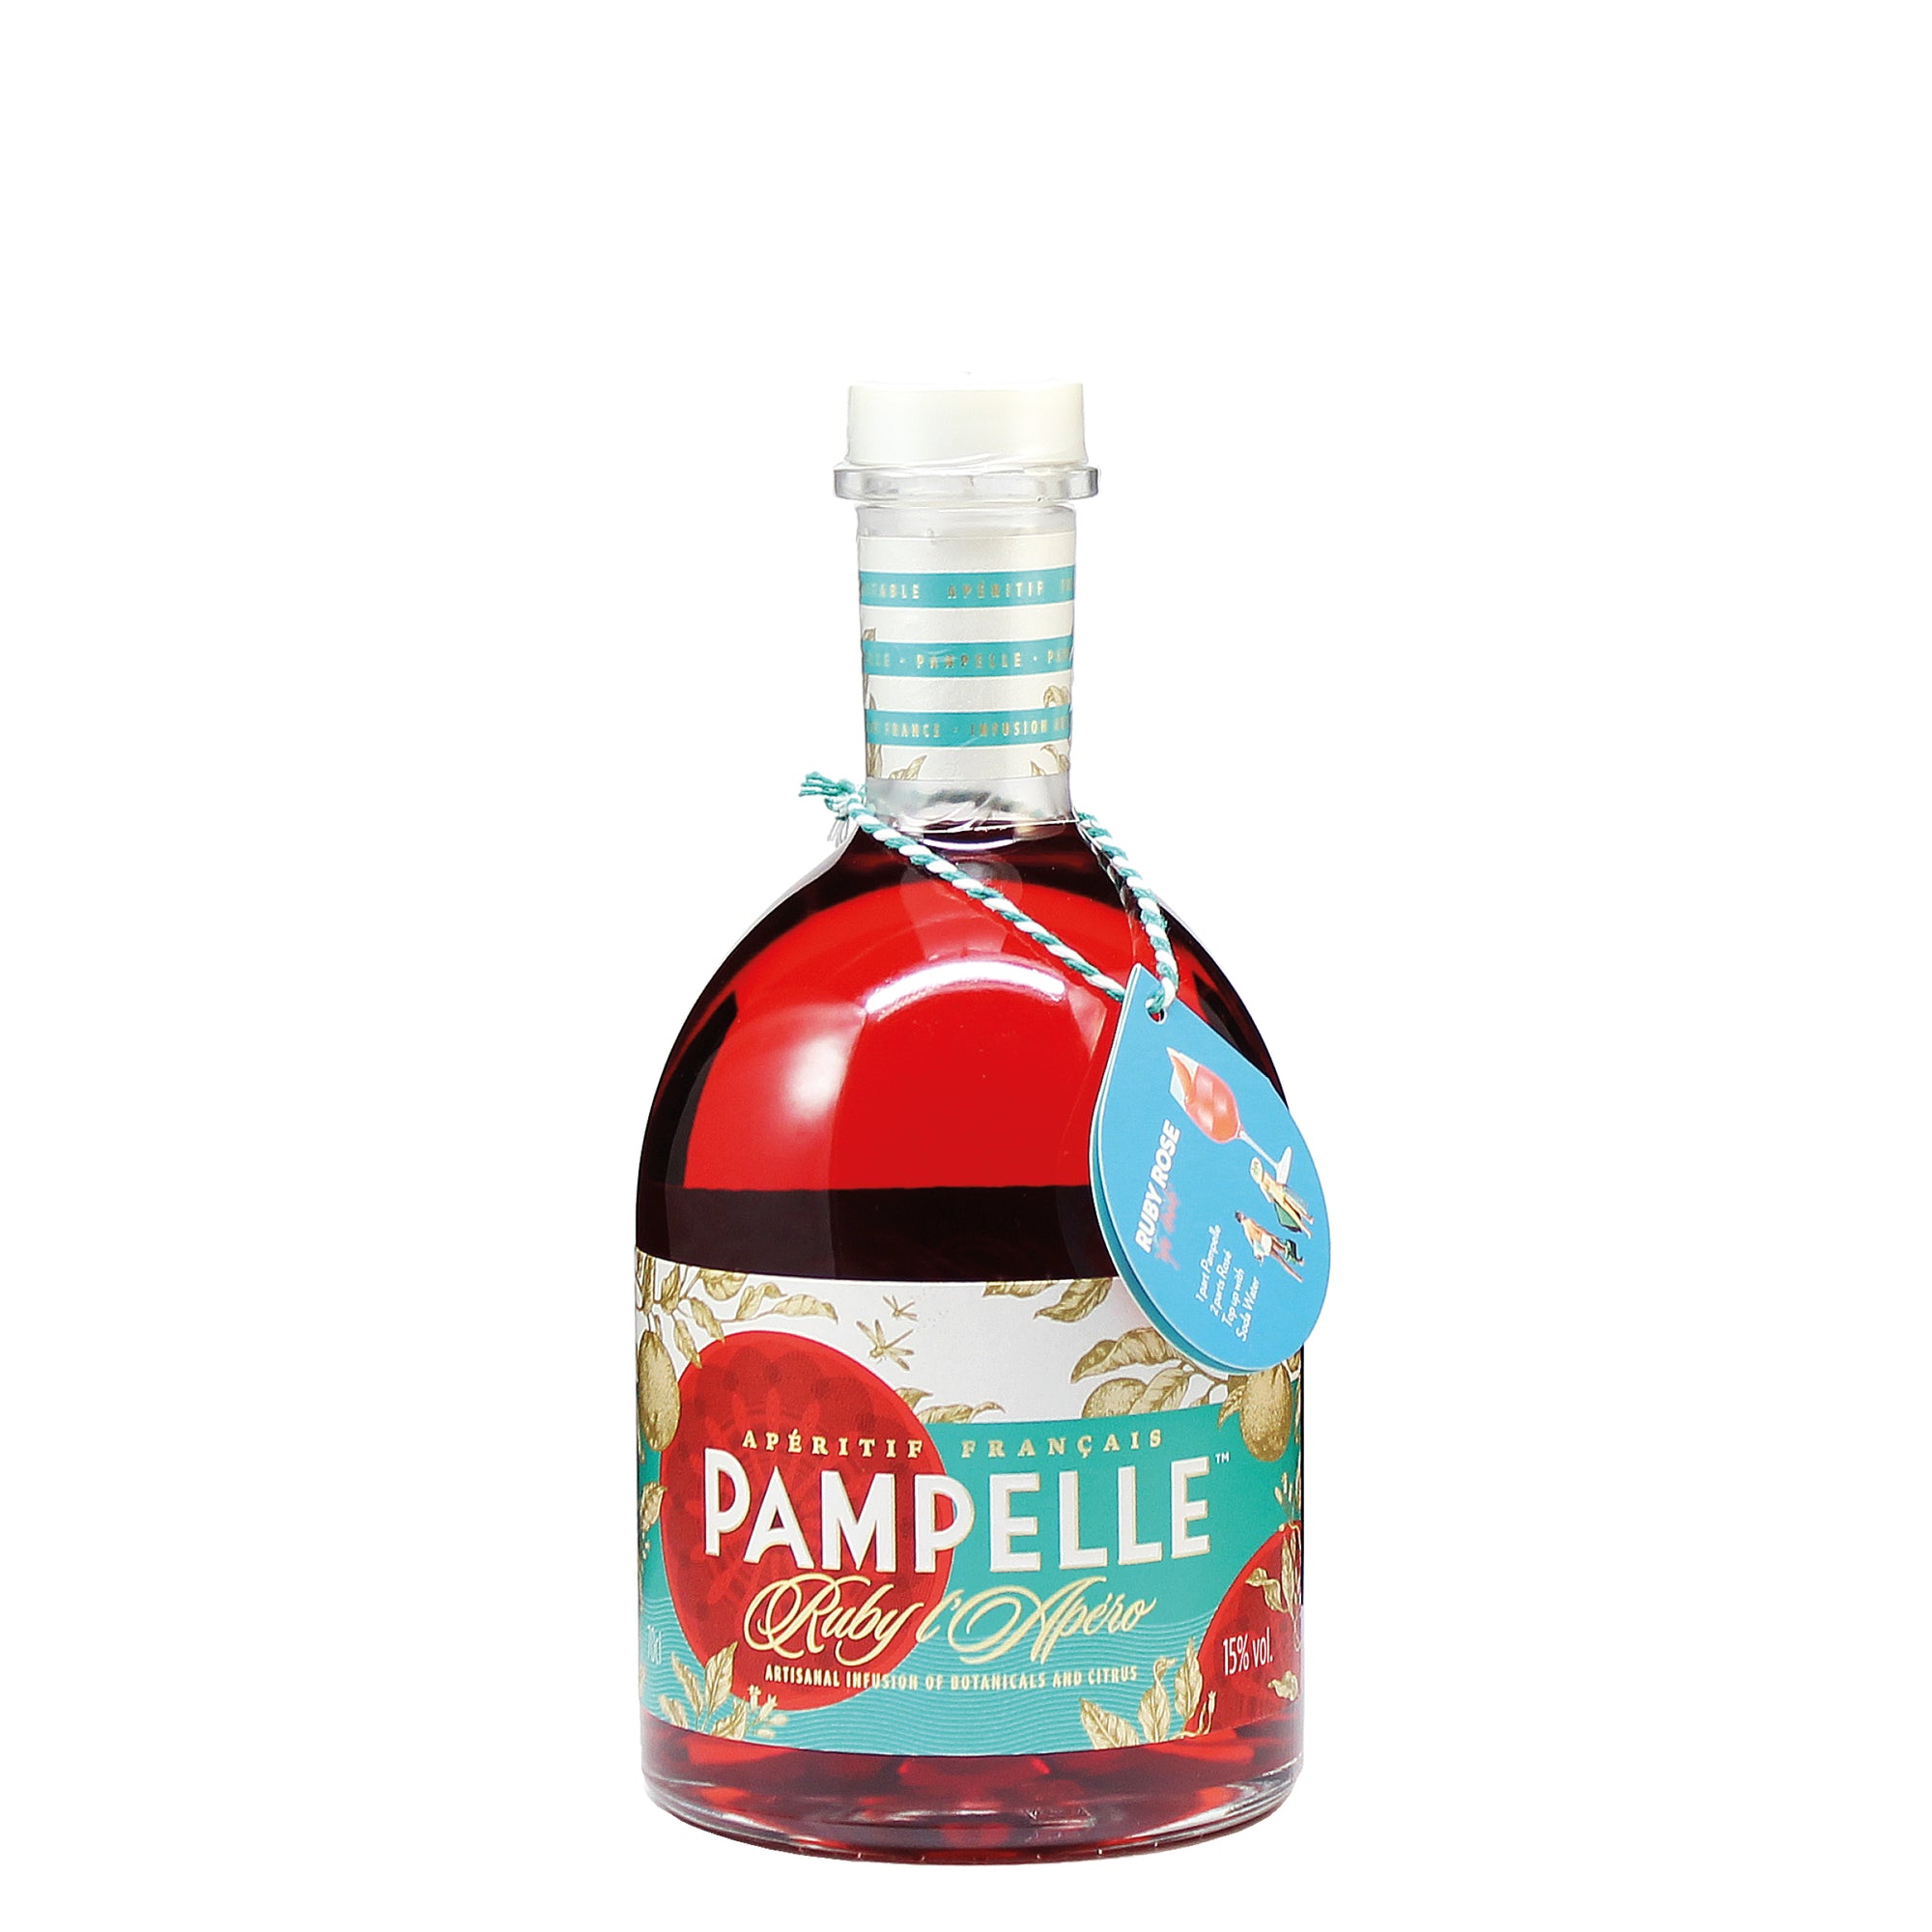 "Pampelle Ruby l'Apero 15% 0,7l"